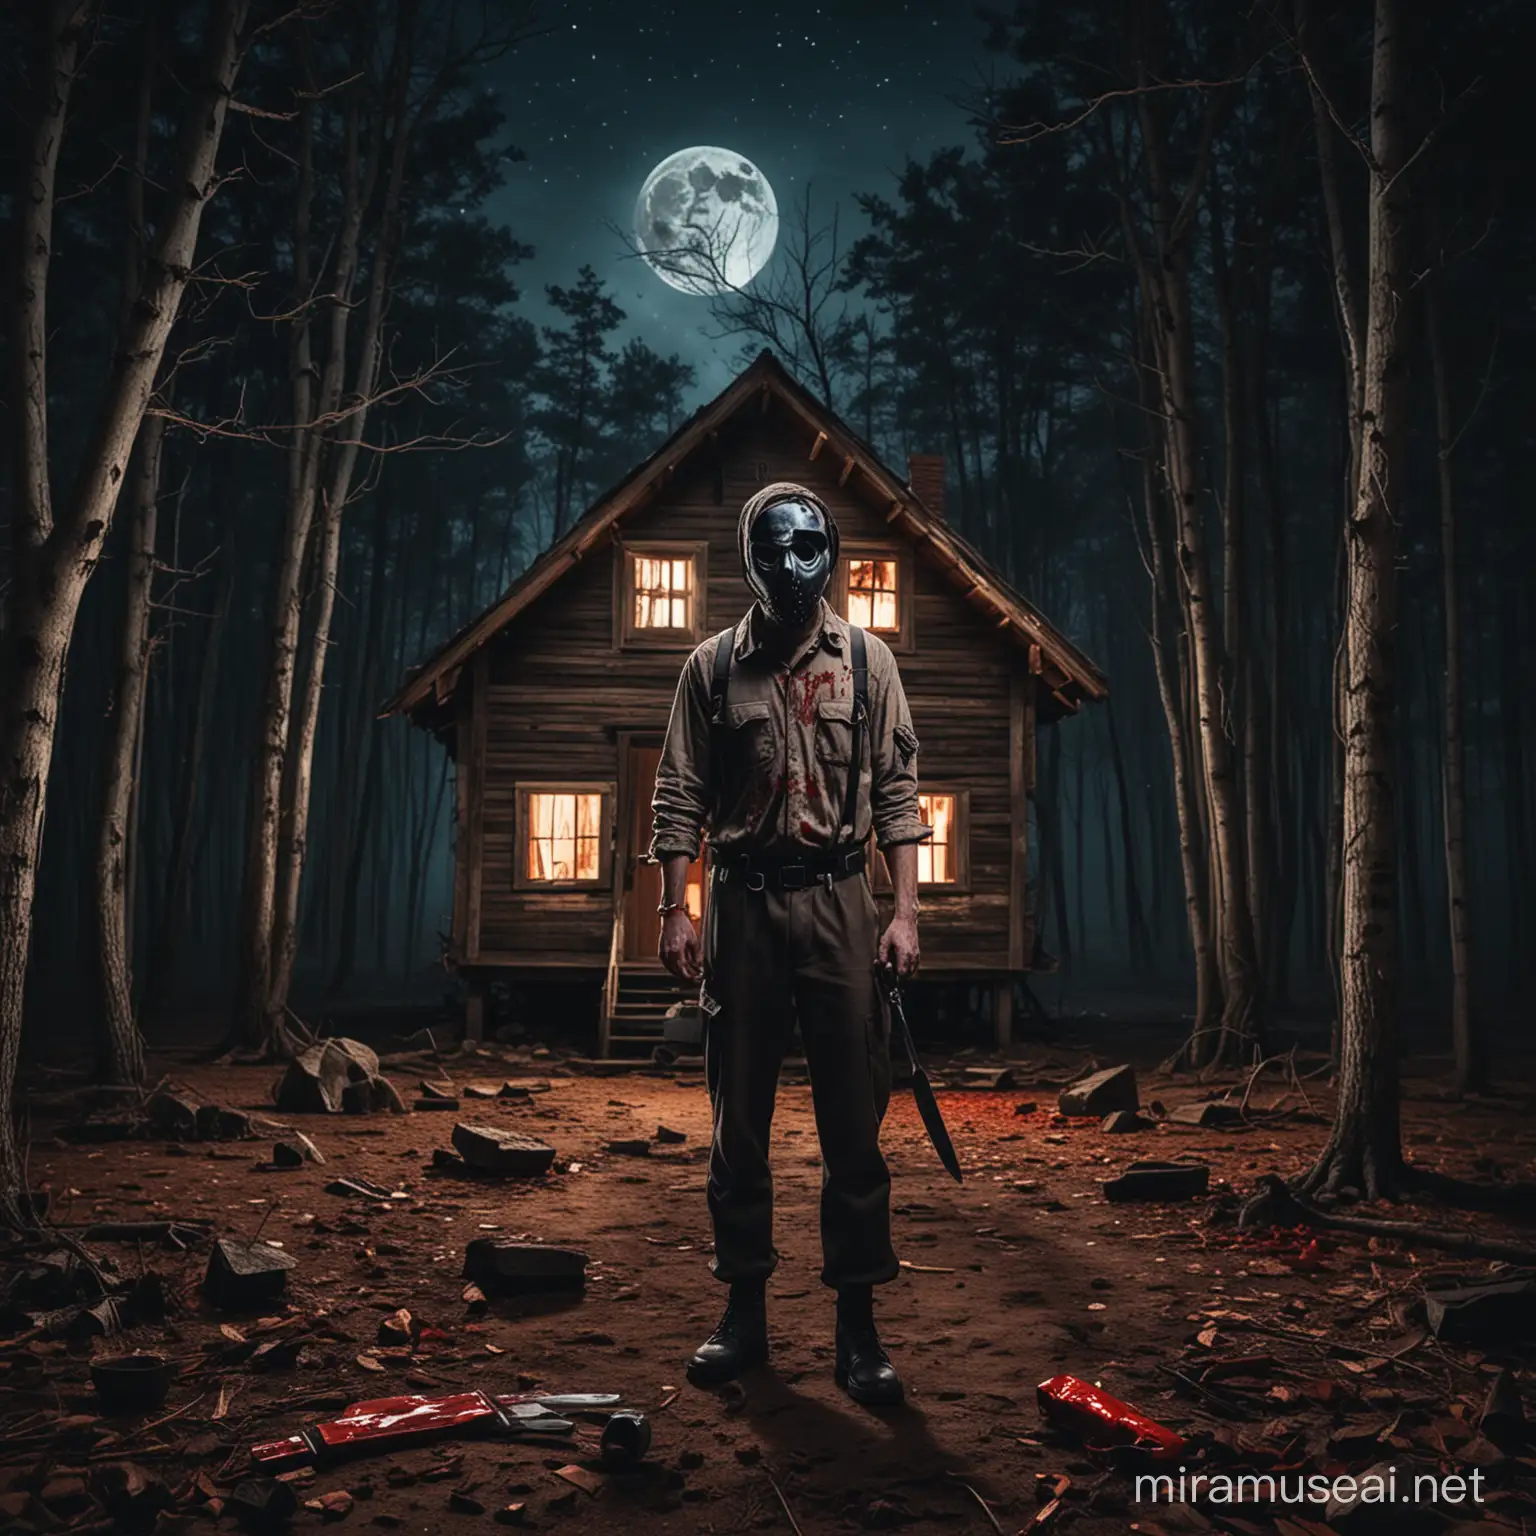 night the moon forest, wooden house, crime scene, serial killer with blood mask and knife in hand

